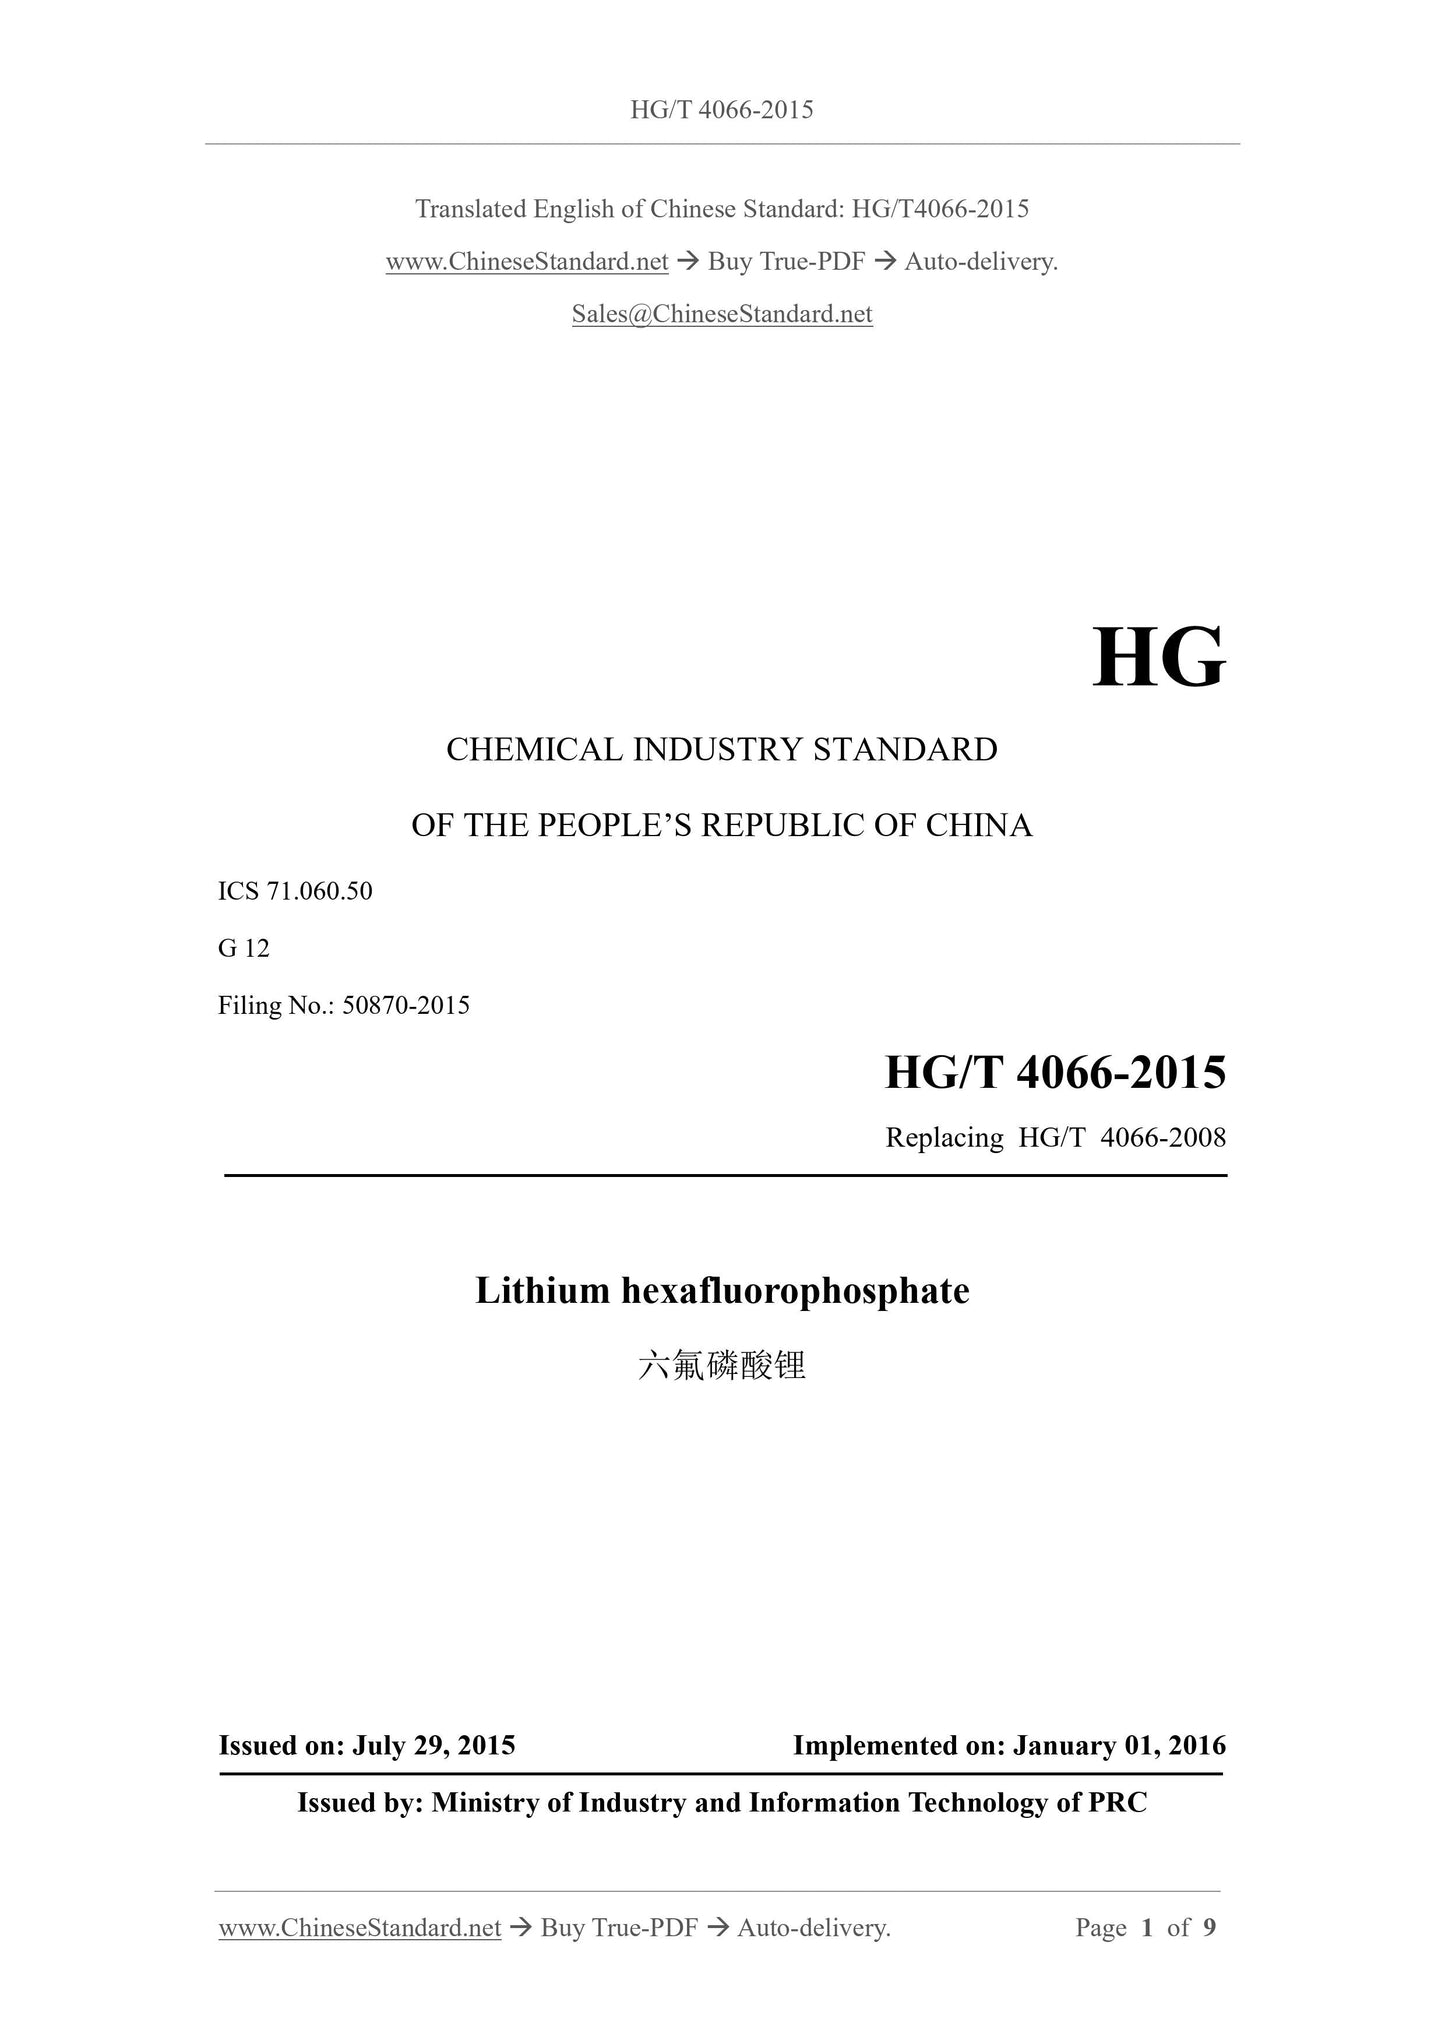 HG/T 4066-2015 Page 1